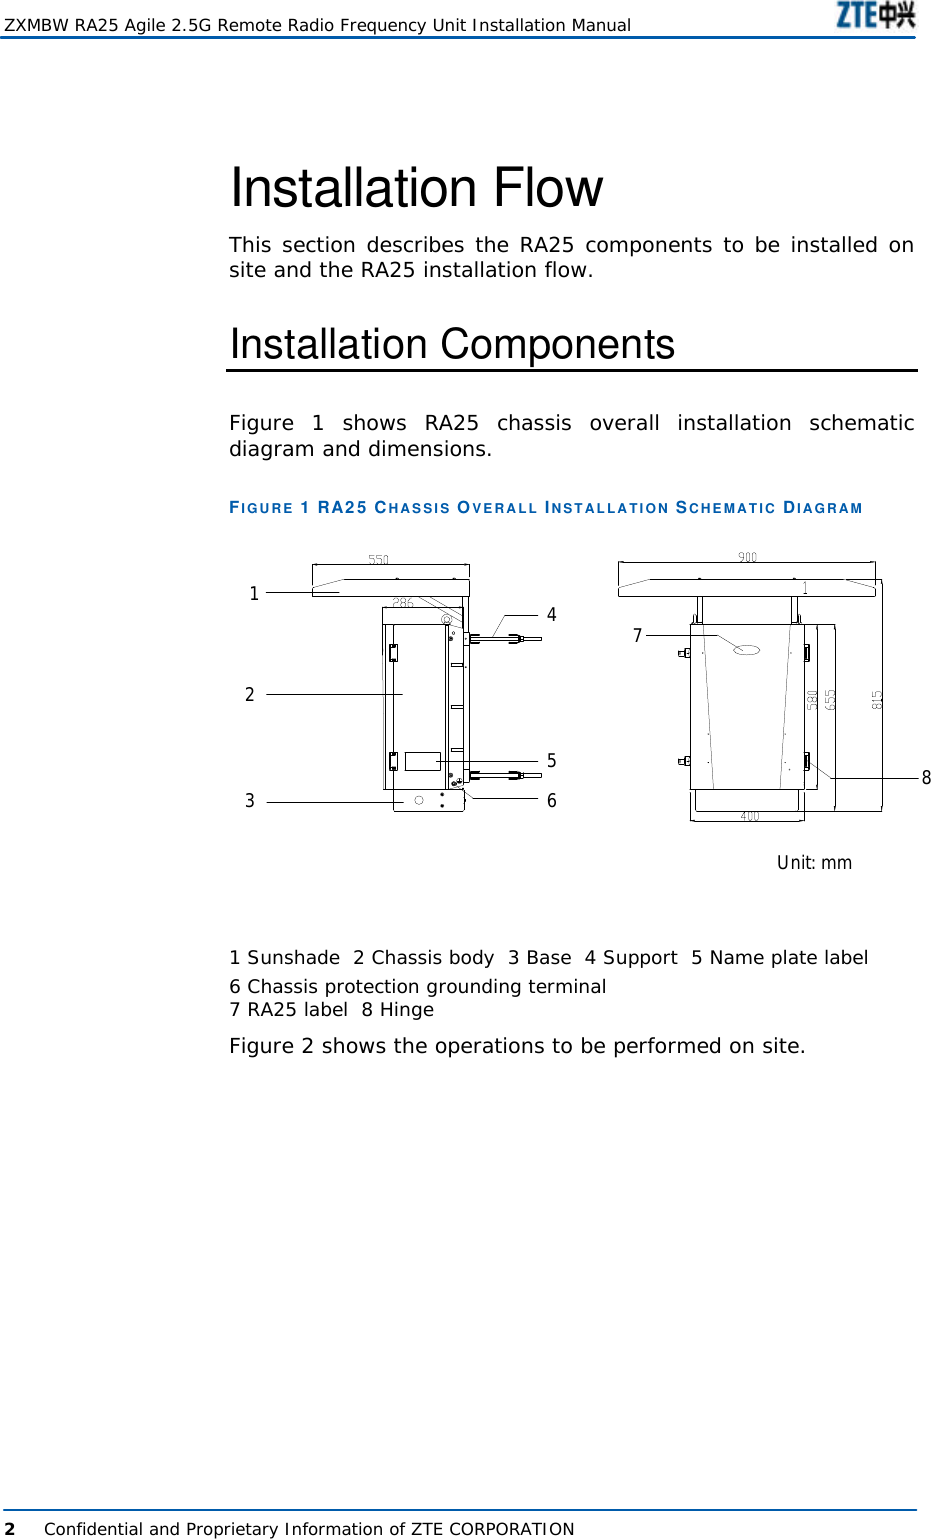  ZXMBW RA25 Agile 2.5G Remote Radio Frequency Unit Installation Manual  2      Confidential and Proprietary Information of ZTE CORPORATION  Installation Flow  This section describes the RA25 components to be installed on site and the RA25 installation flow.  Installation Components  Figure  1 shows RA25 chassis overall installation schematic diagram and dimensions.  FIGURE 1 RA25 CHASSIS OVERALL INSTALLATION SCHEMATIC DIAGRAM Unit: mm12345678 1 Sunshade  2 Chassis body  3 Base  4 Support  5 Name plate label   6 Chassis protection grounding terminal   7 RA25 label  8 Hinge Figure 2 shows the operations to be performed on site.  